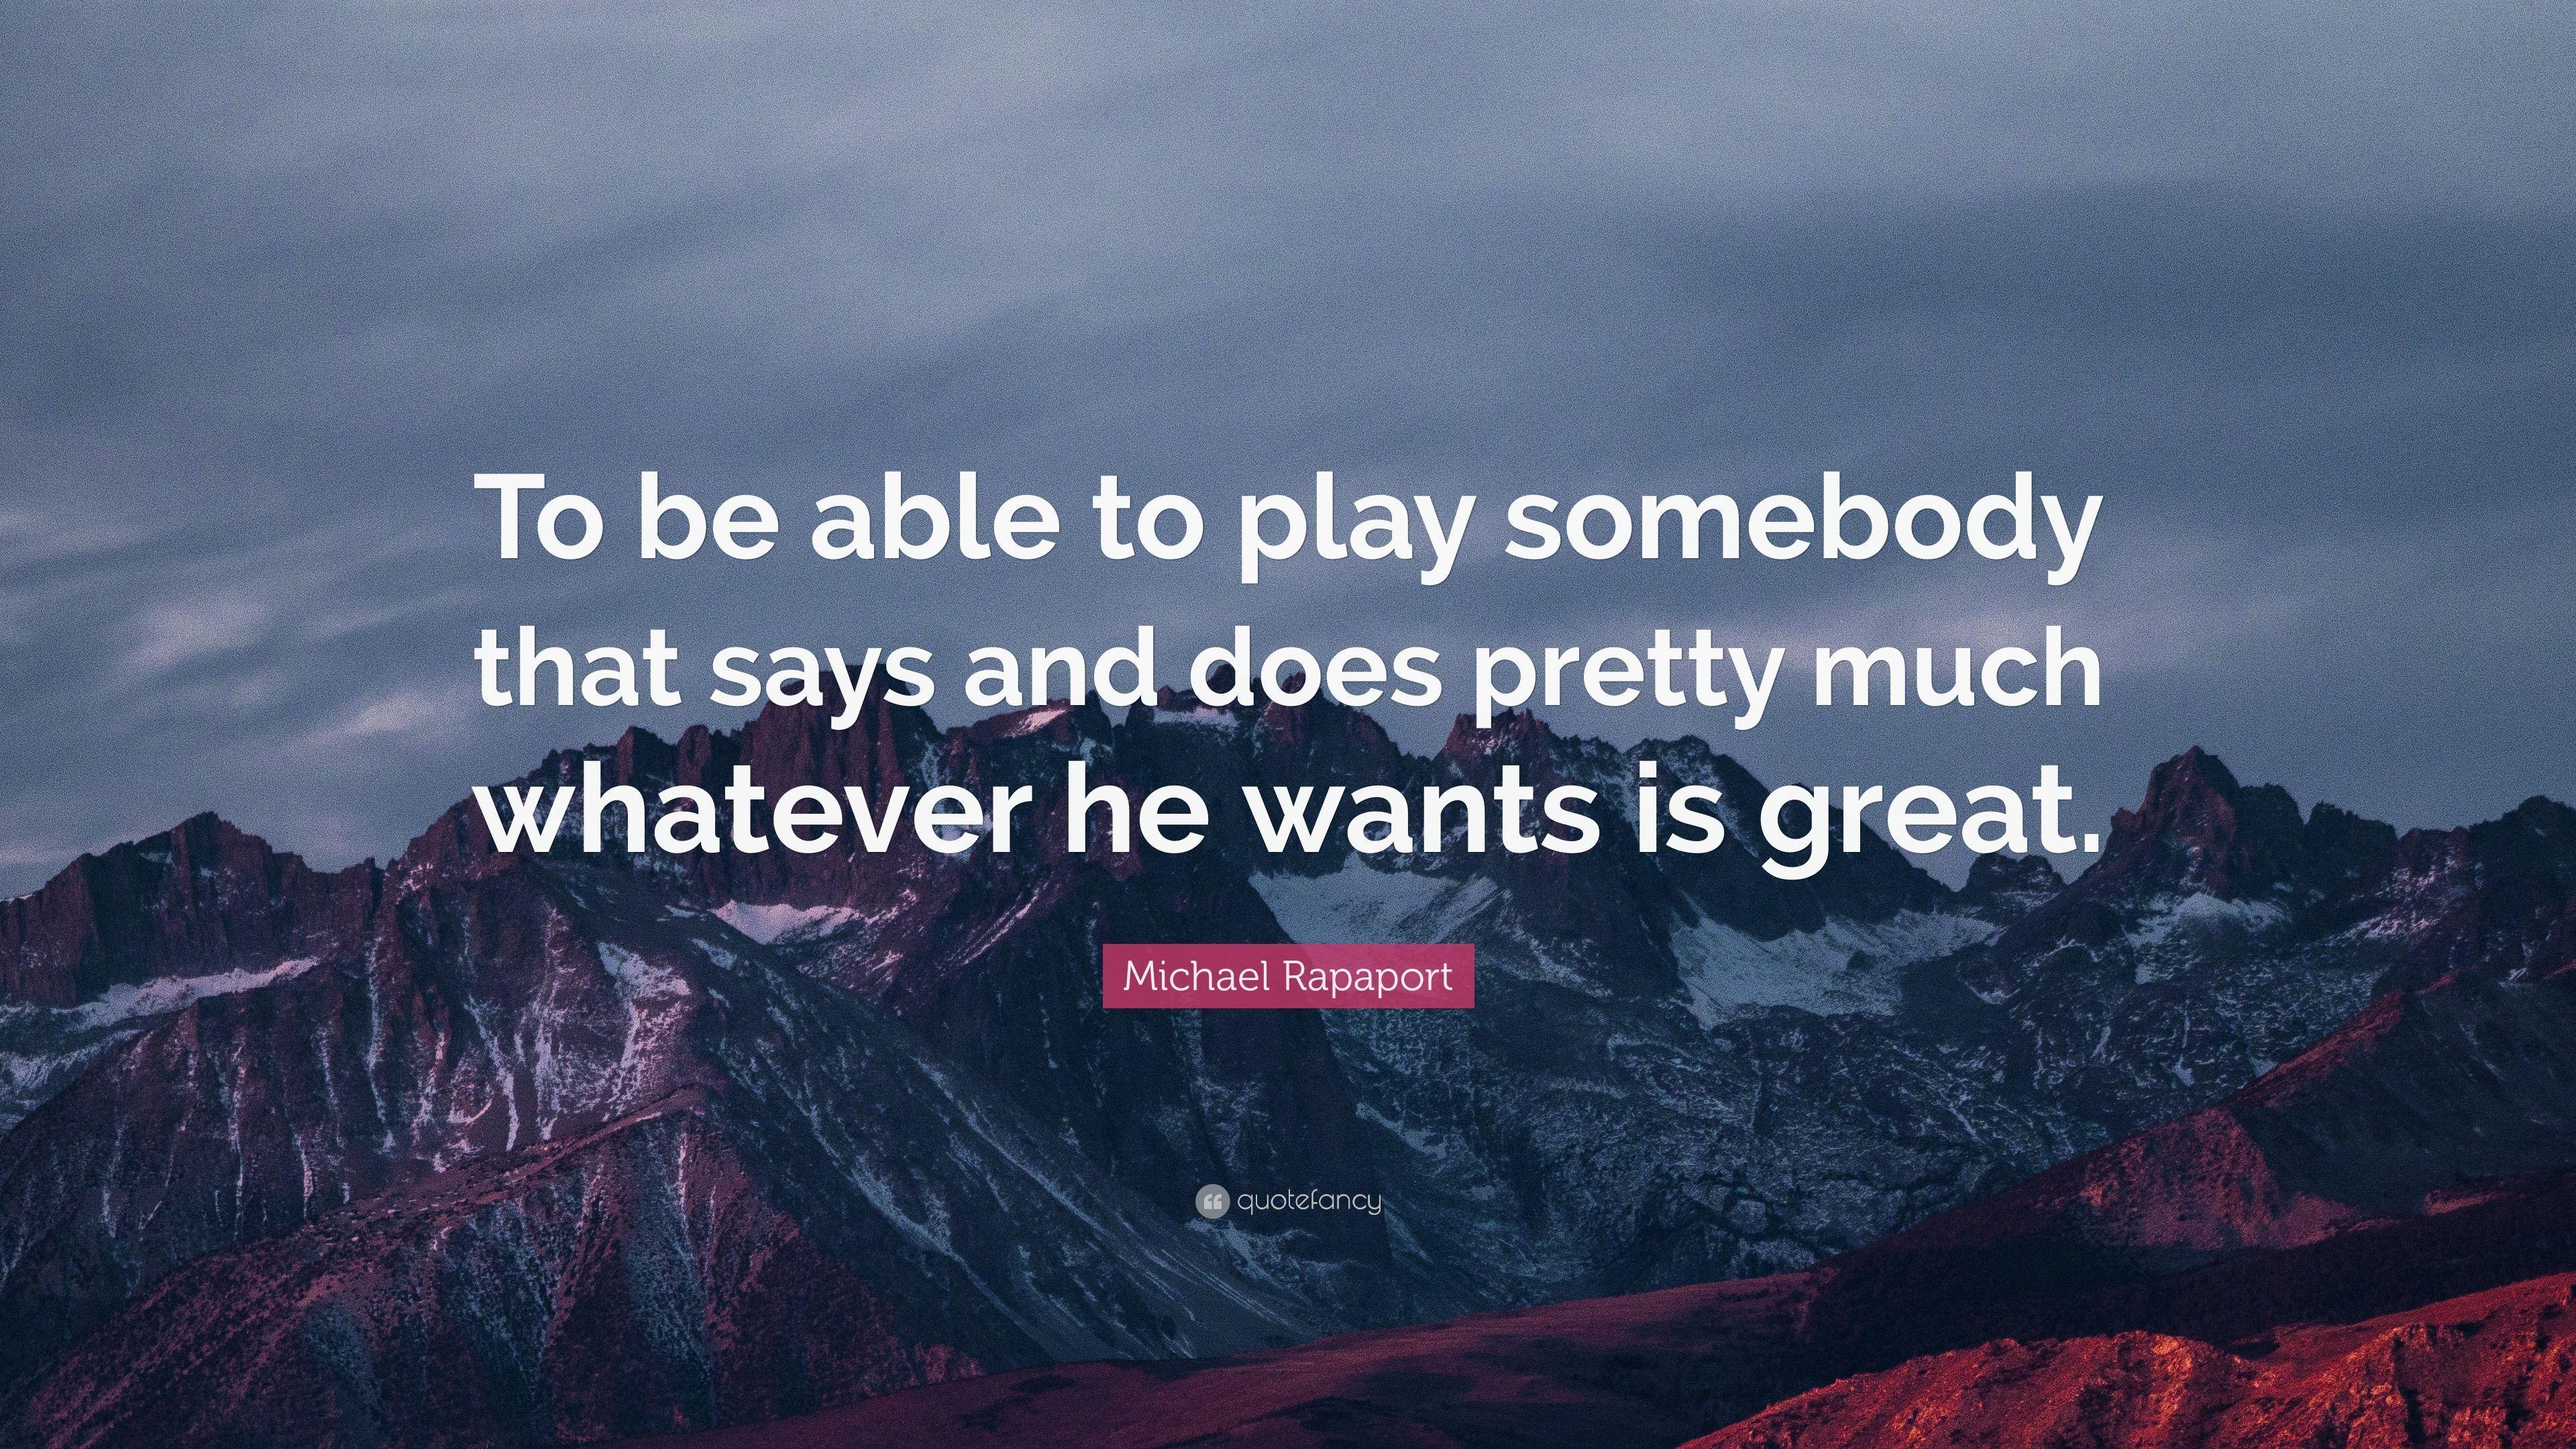 Michael Rapaport Quote: “To be able to play somebody that says